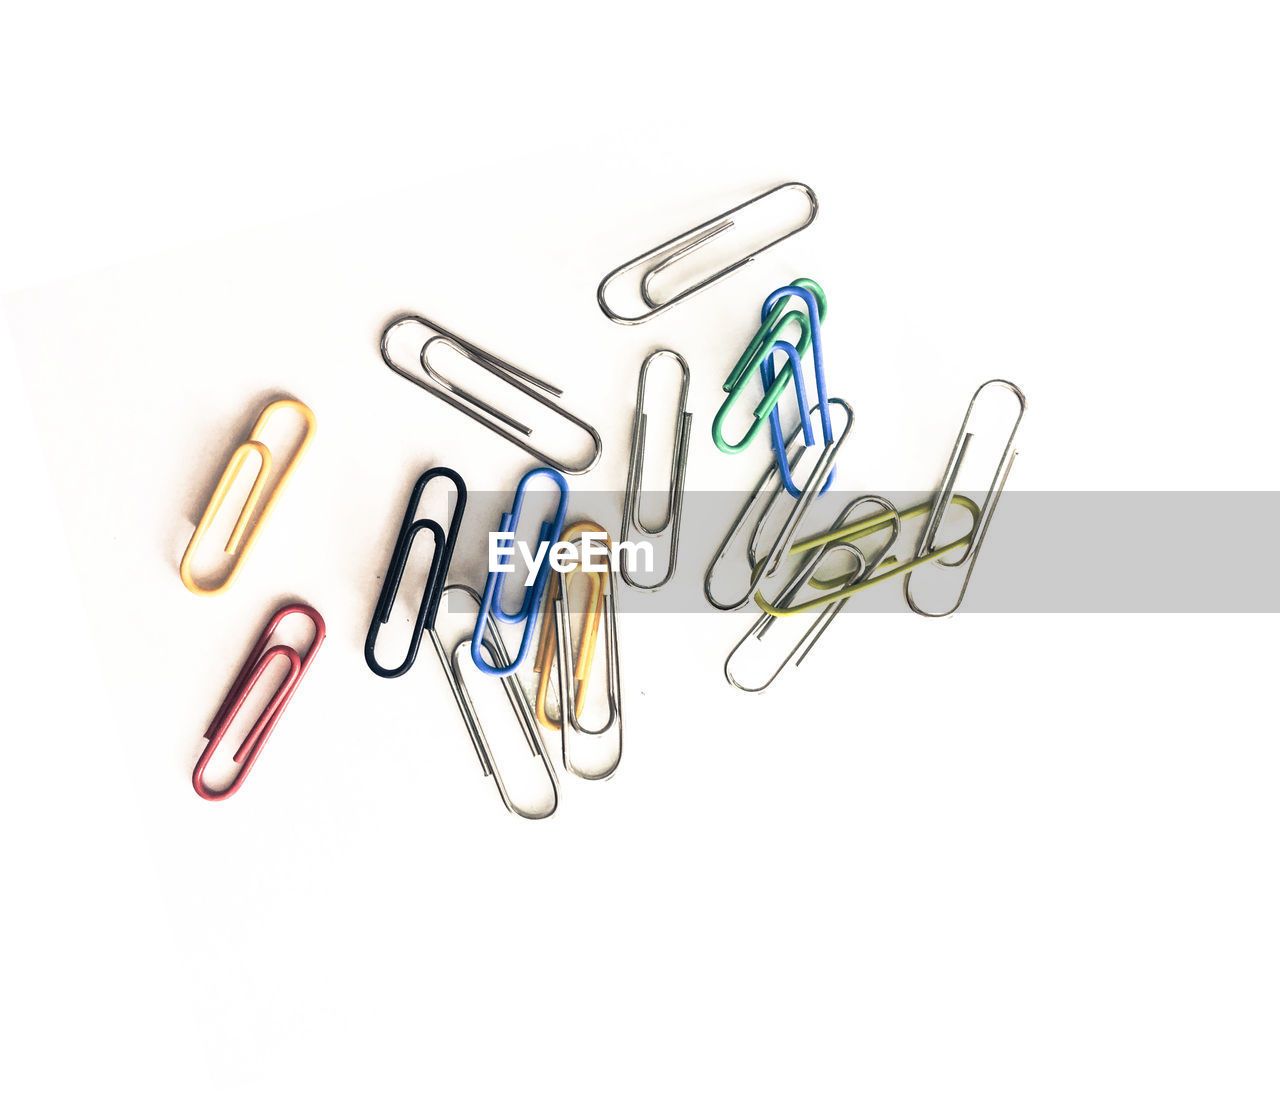 HIGH ANGLE VIEW OF OBJECTS ON WHITE BACKGROUND